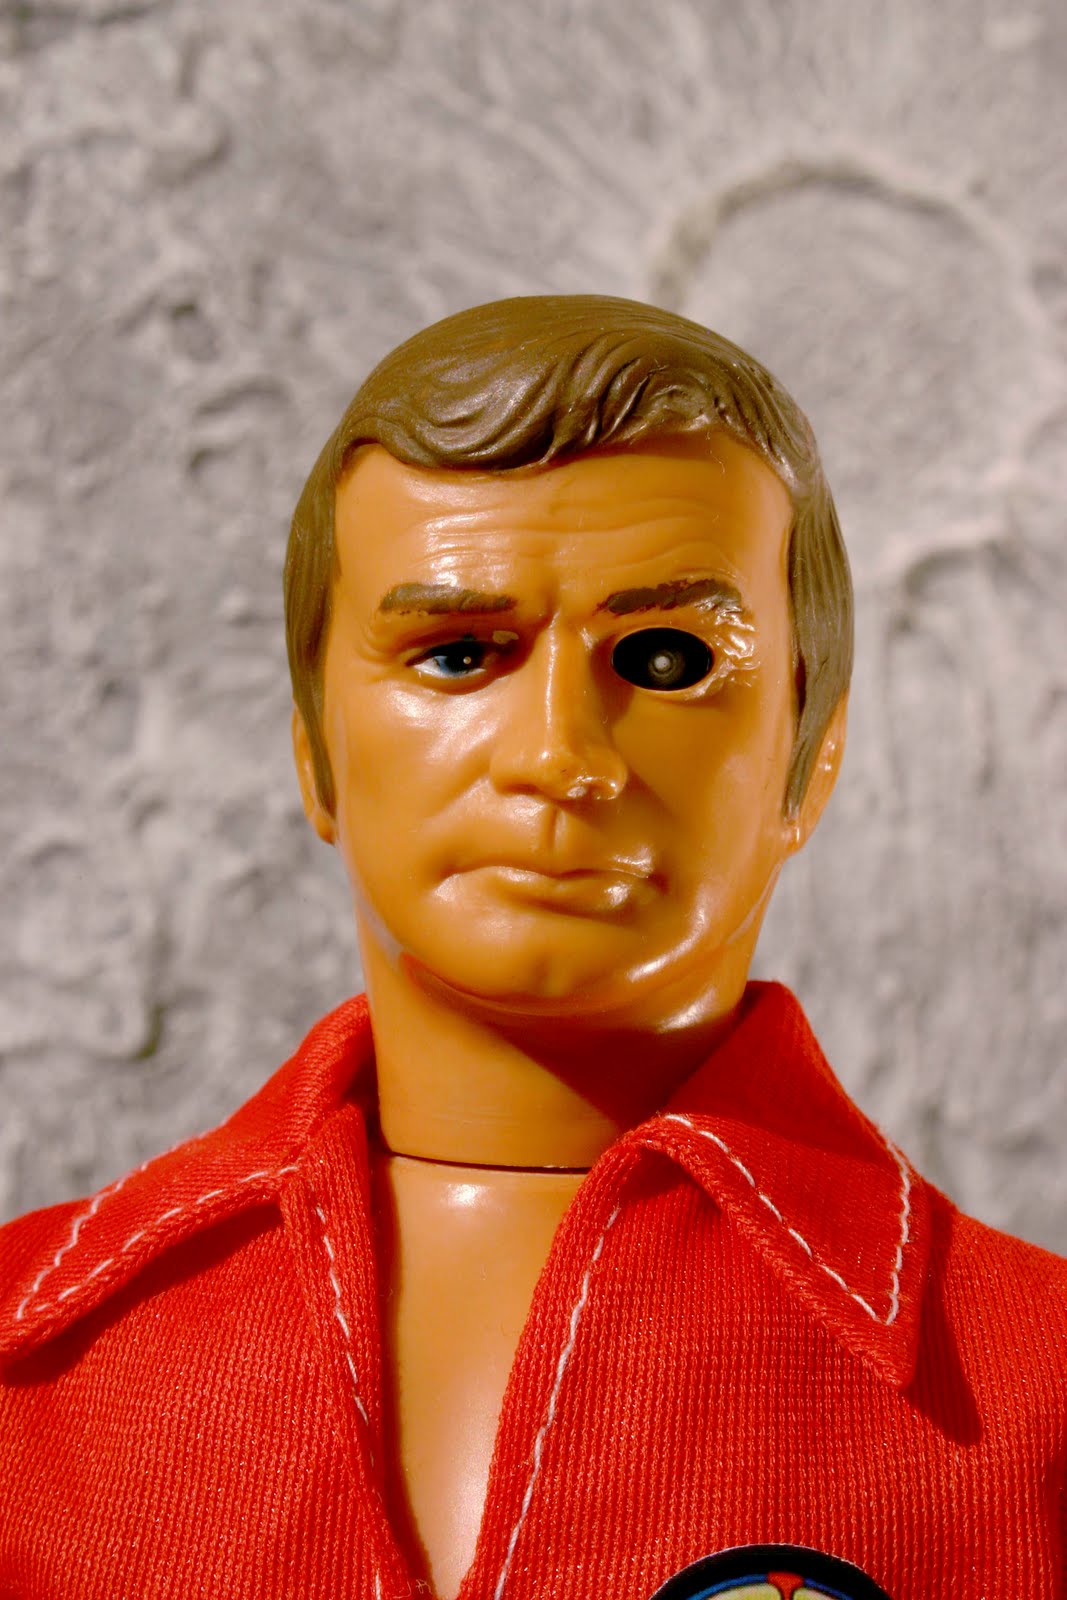 In 74, The Million Man starring Lee Majors premieres on ABC TV.  I had this toy.